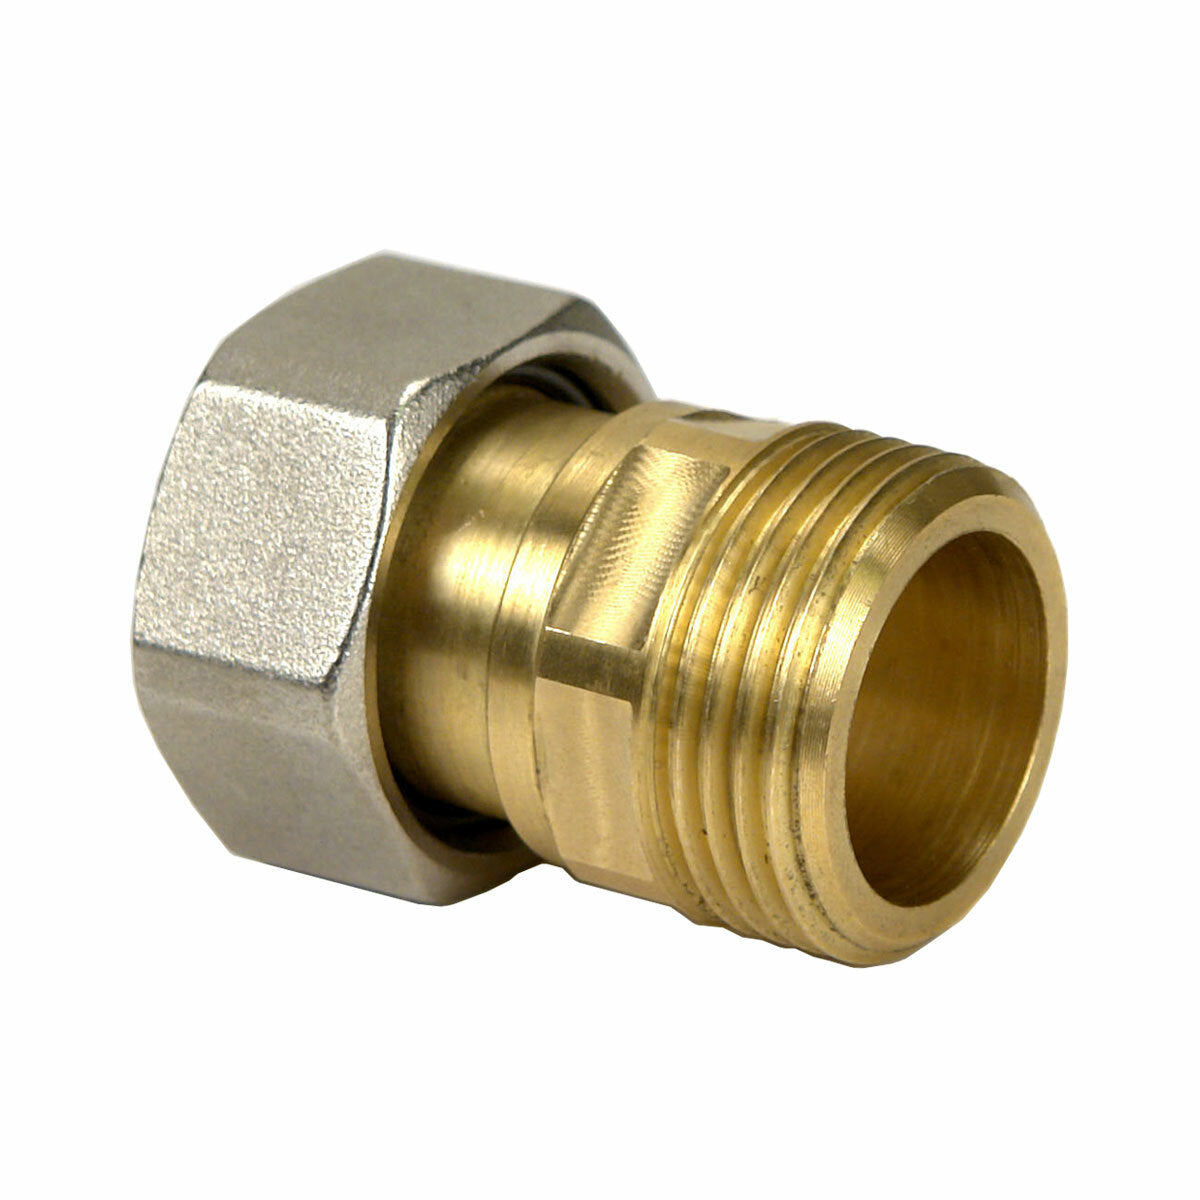 Enolgas Reverso fitting M 1" x 1" swivel for ball valves ideal for boiler manifold and fan coil units